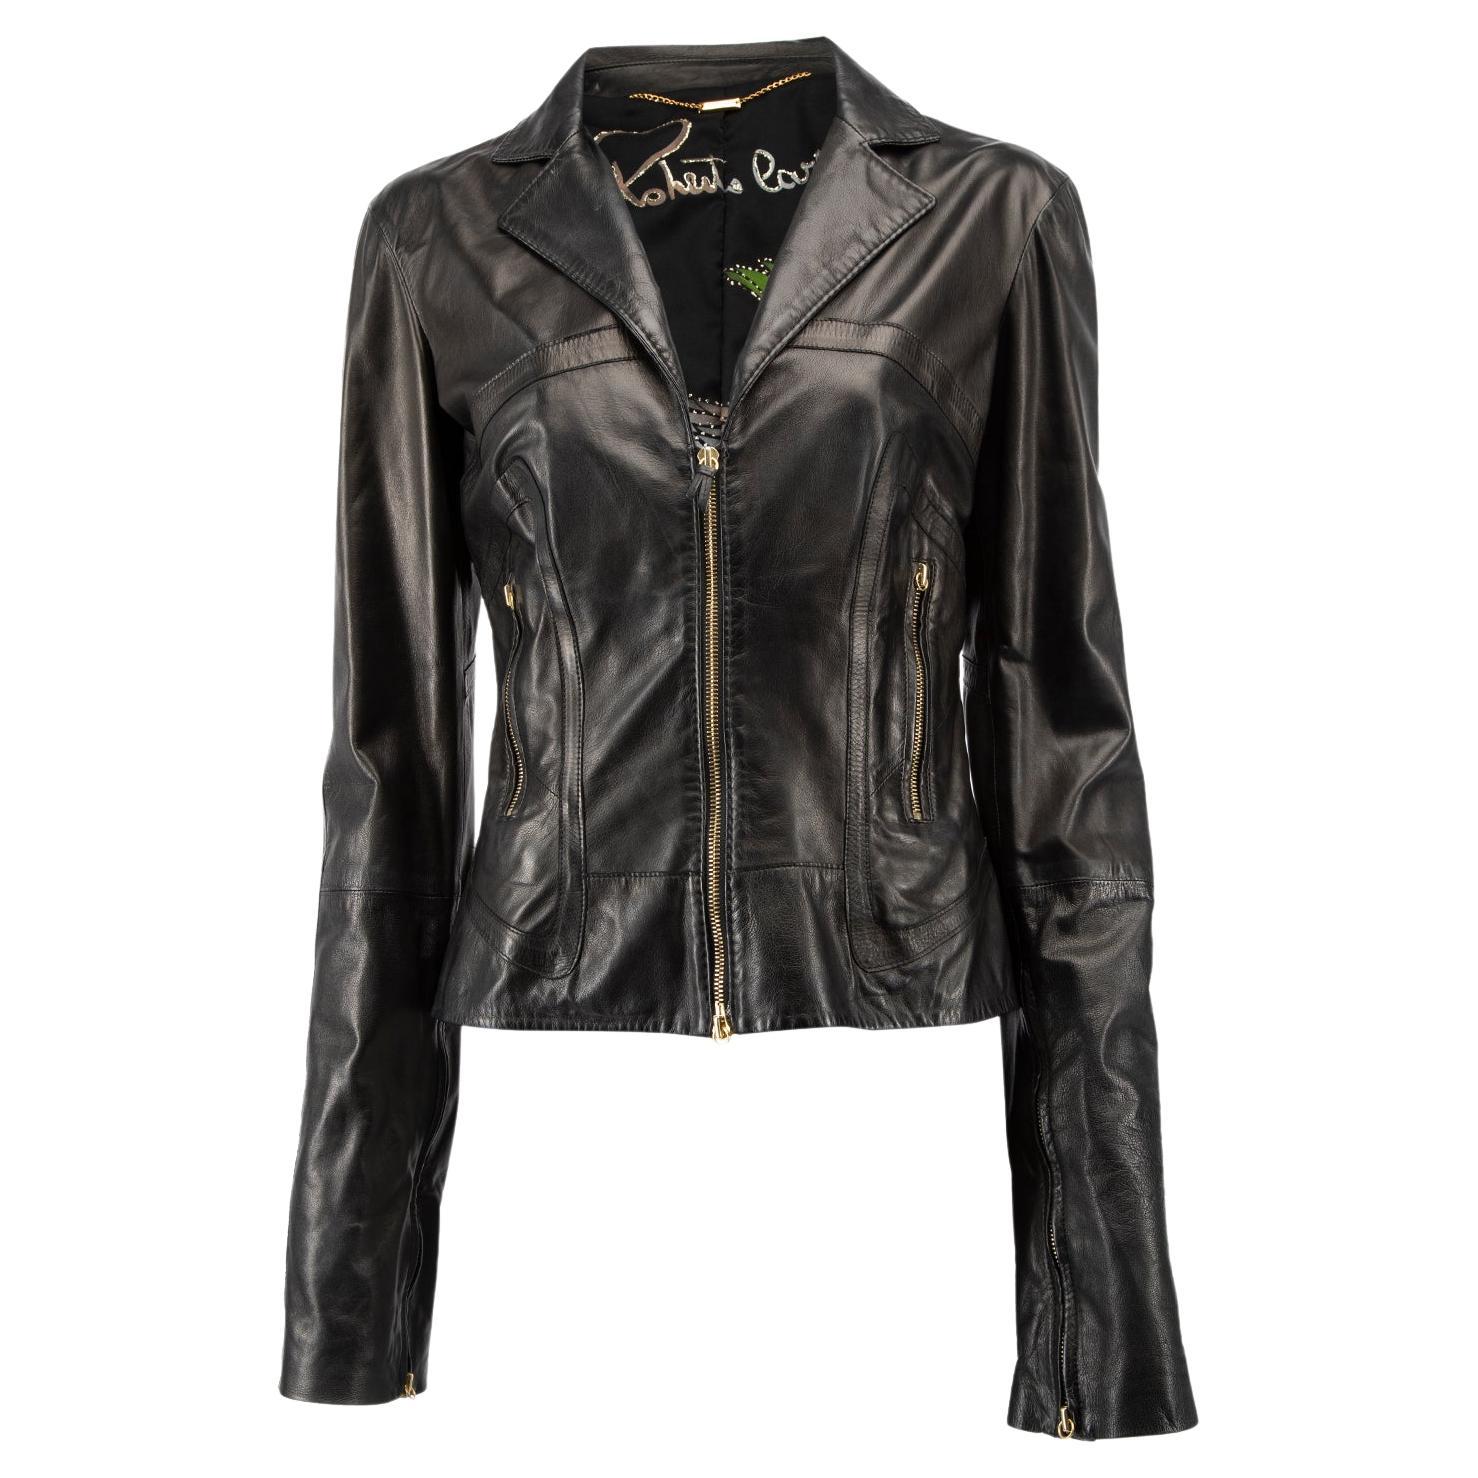 Pre-Loved Roberto Cavalli Women's Black Leather Jacket with Gold Tone Zips